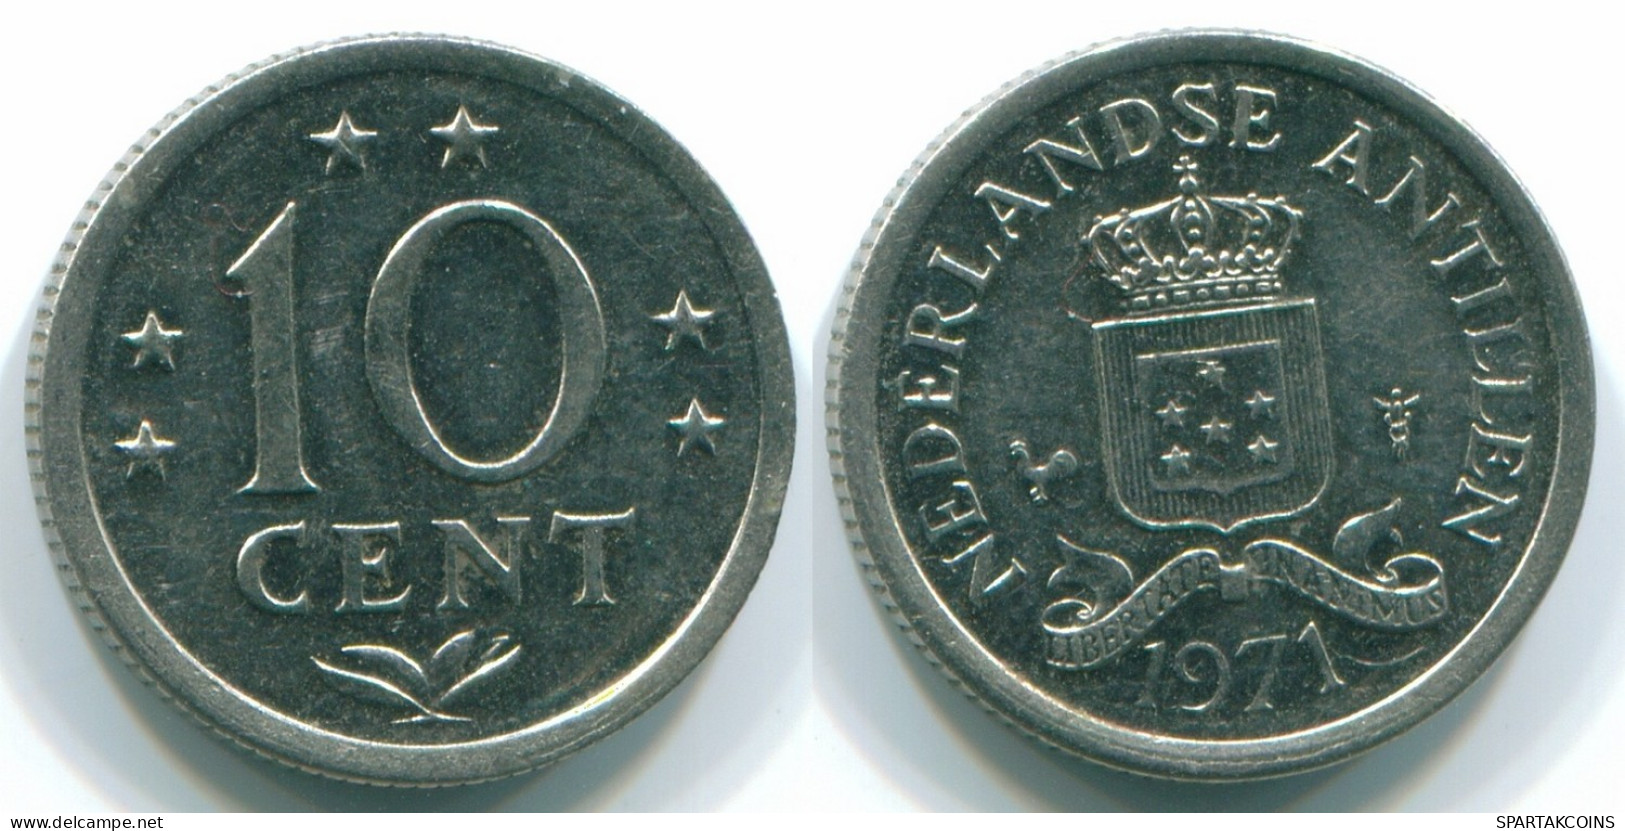 10 CENTS 1971 NETHERLANDS ANTILLES Nickel Colonial Coin #S13428.U.A - Antille Olandesi